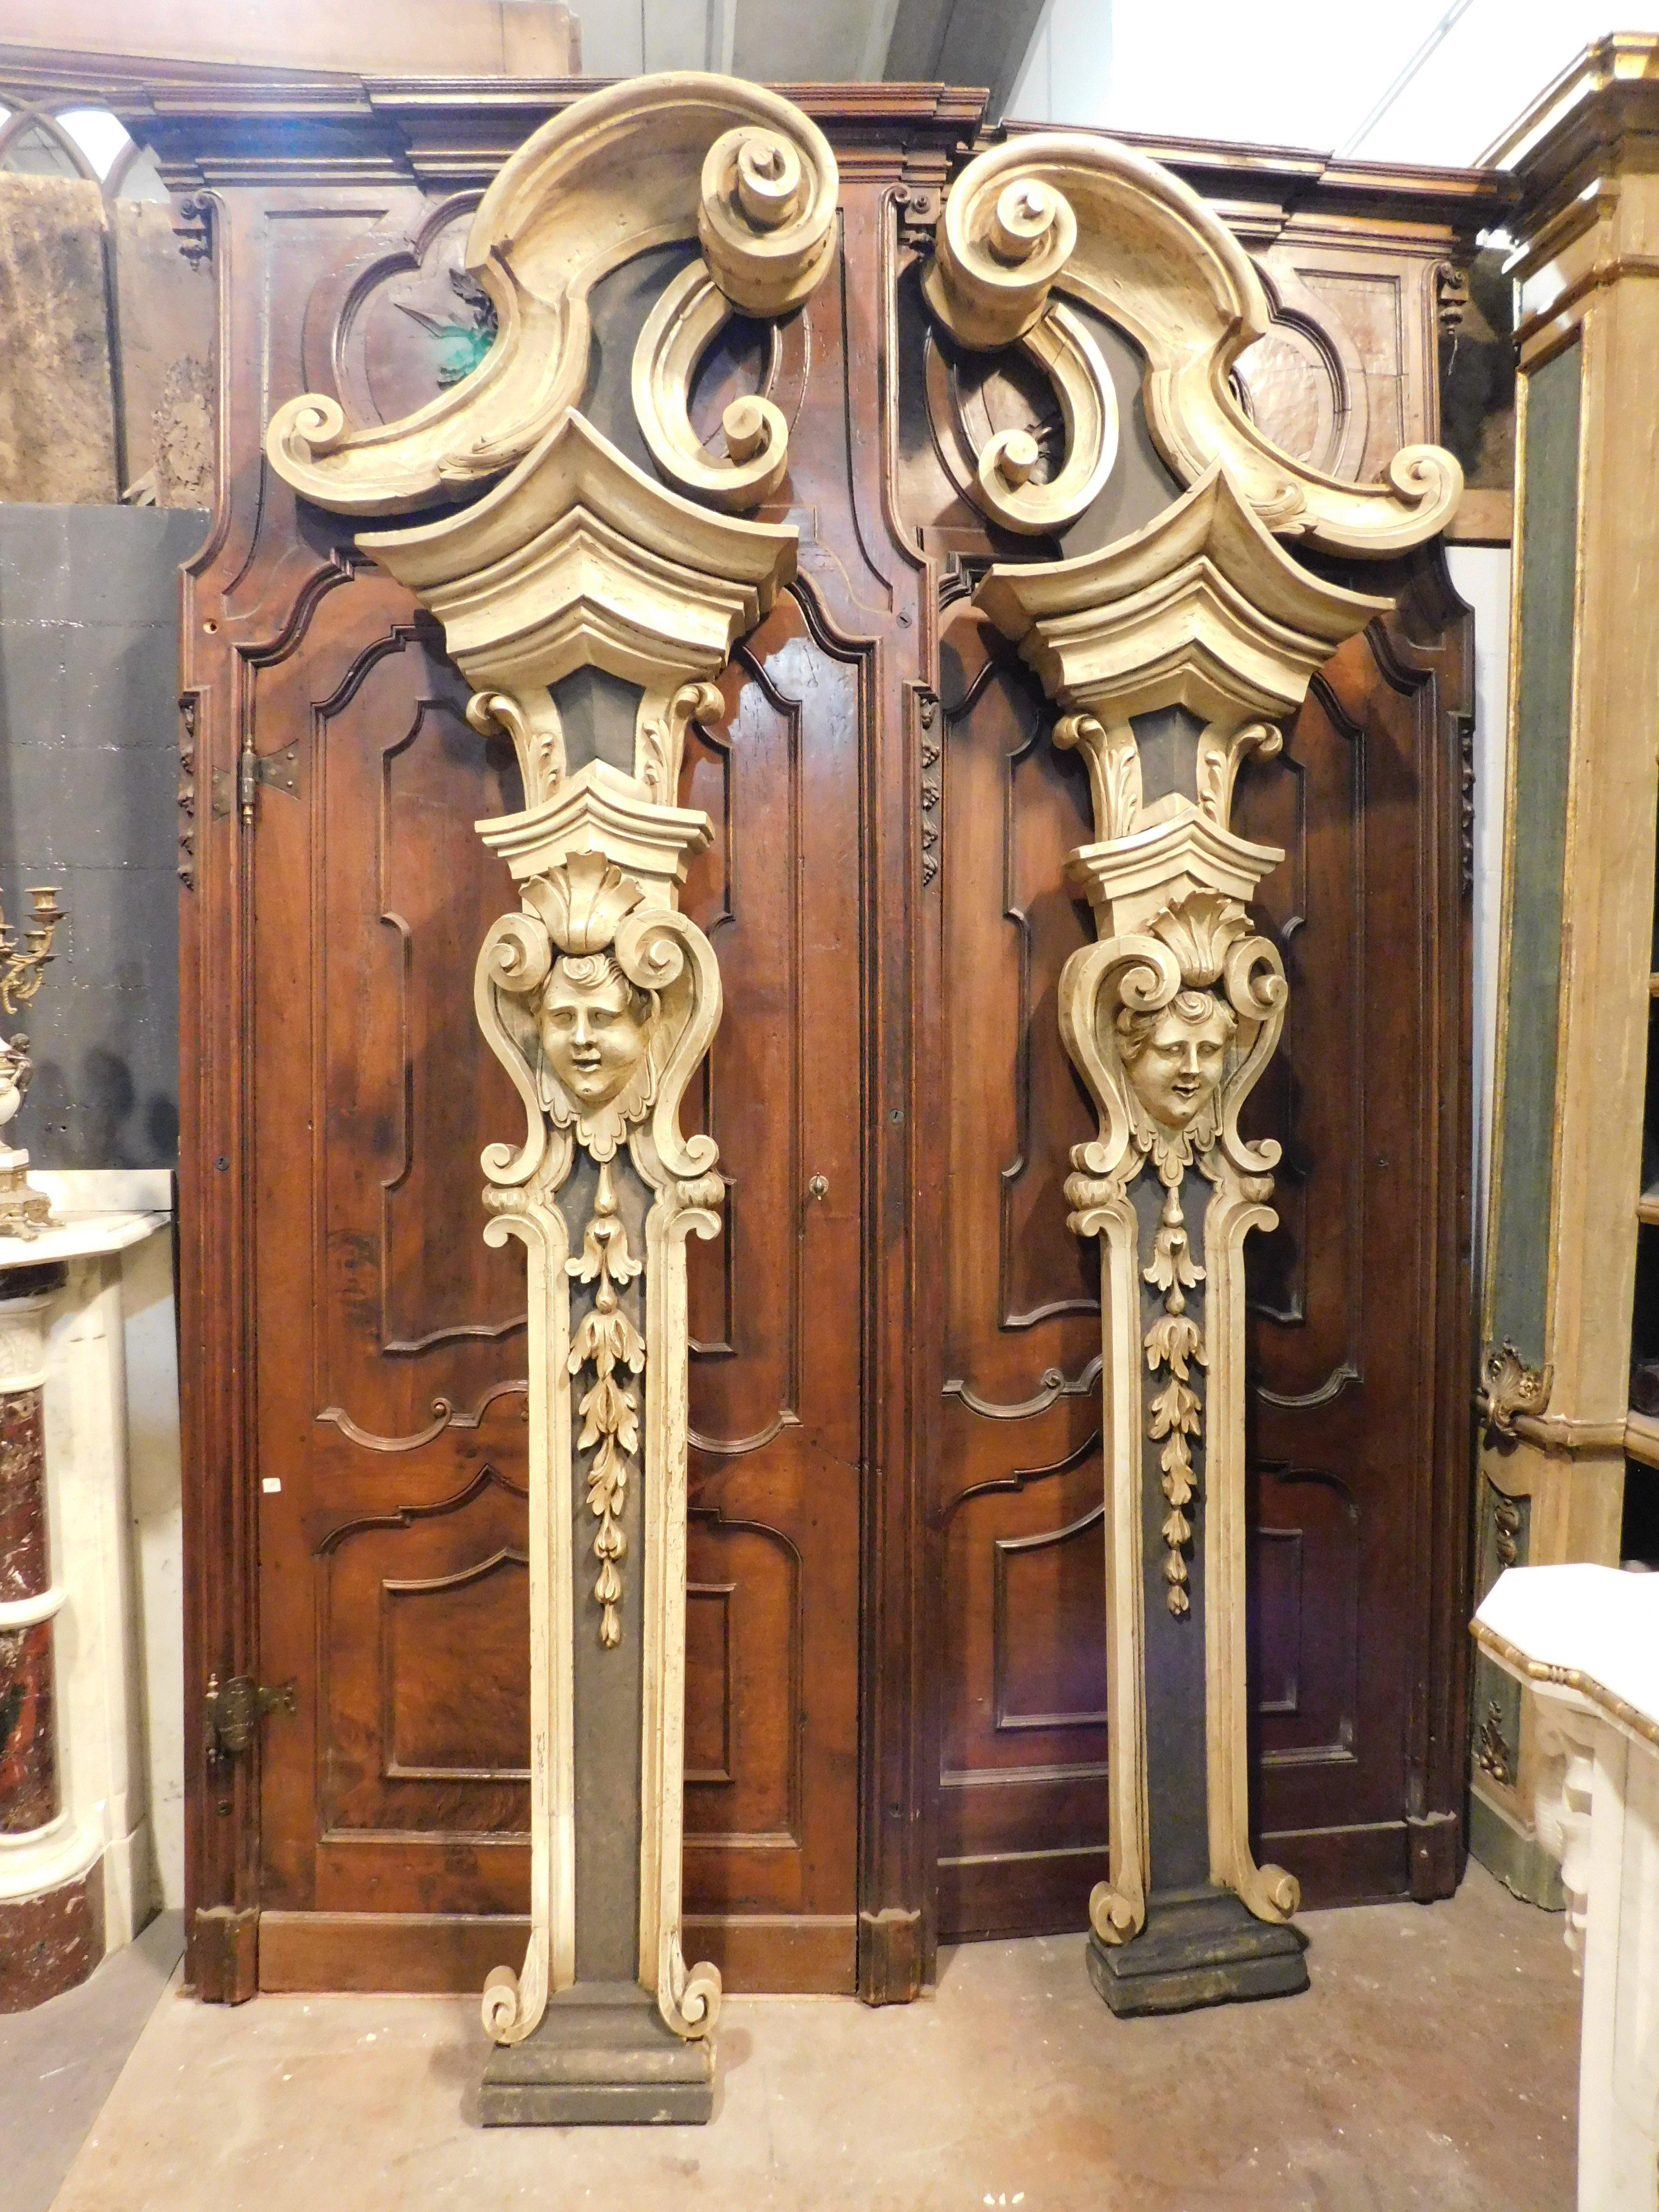 Ancient antique pair of pilasters, hand-carved support columns, richly carved with period decorations and faces of children, hand lacquered in shades of forest green and dark beige, probably coming from a rich noble house or church, from Italy,